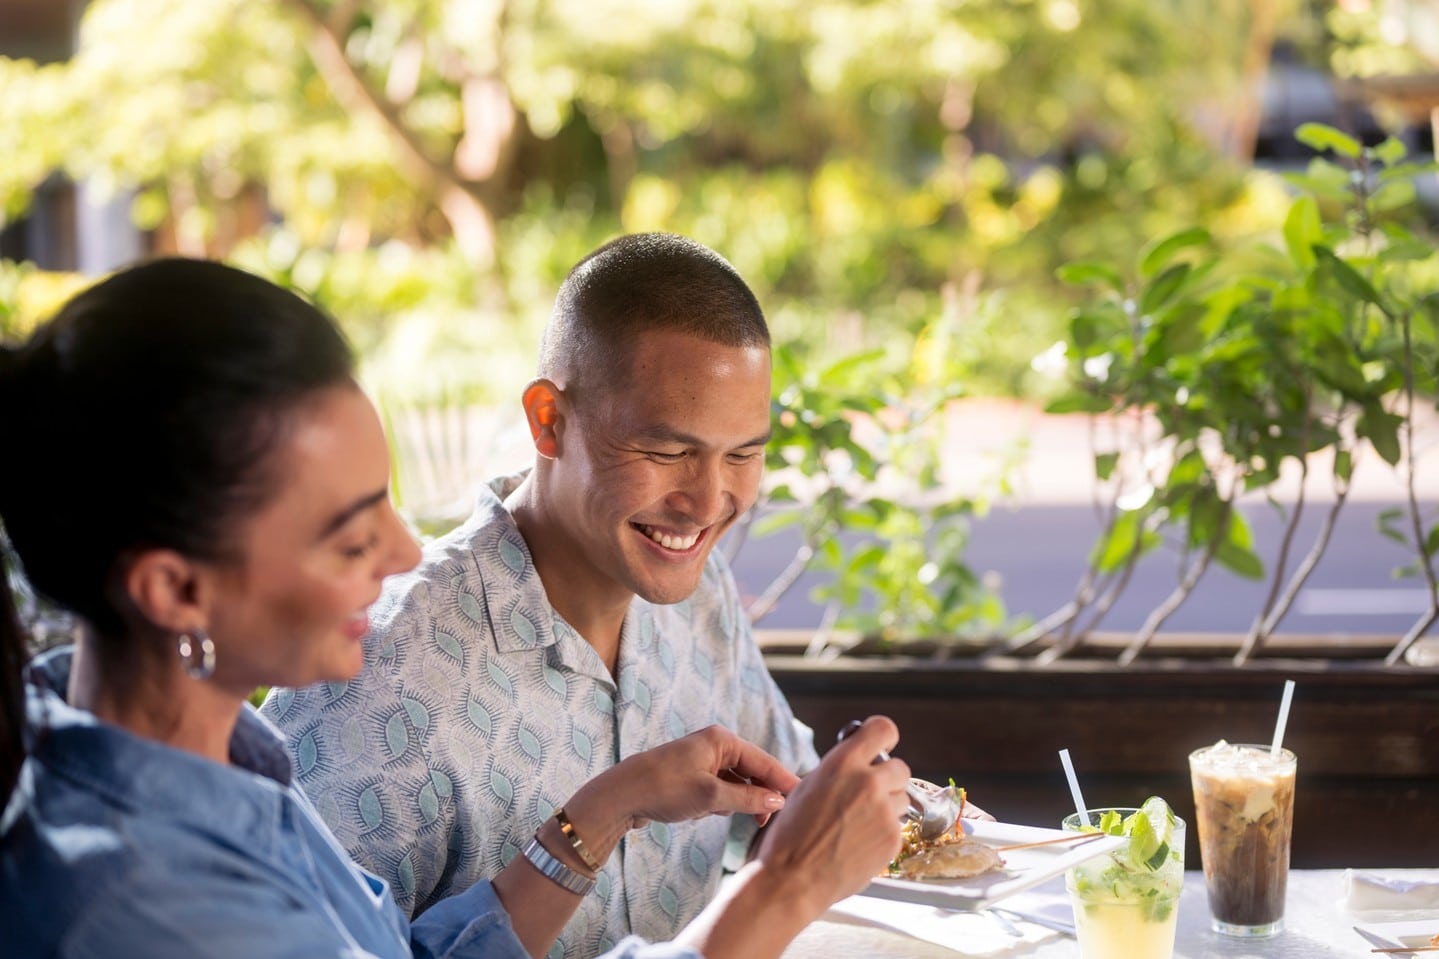 Aloha Friday means the weekend is here! Connect with your friends and family at your favorite neighborhood cafés, boutiques, and entertainment offerings.